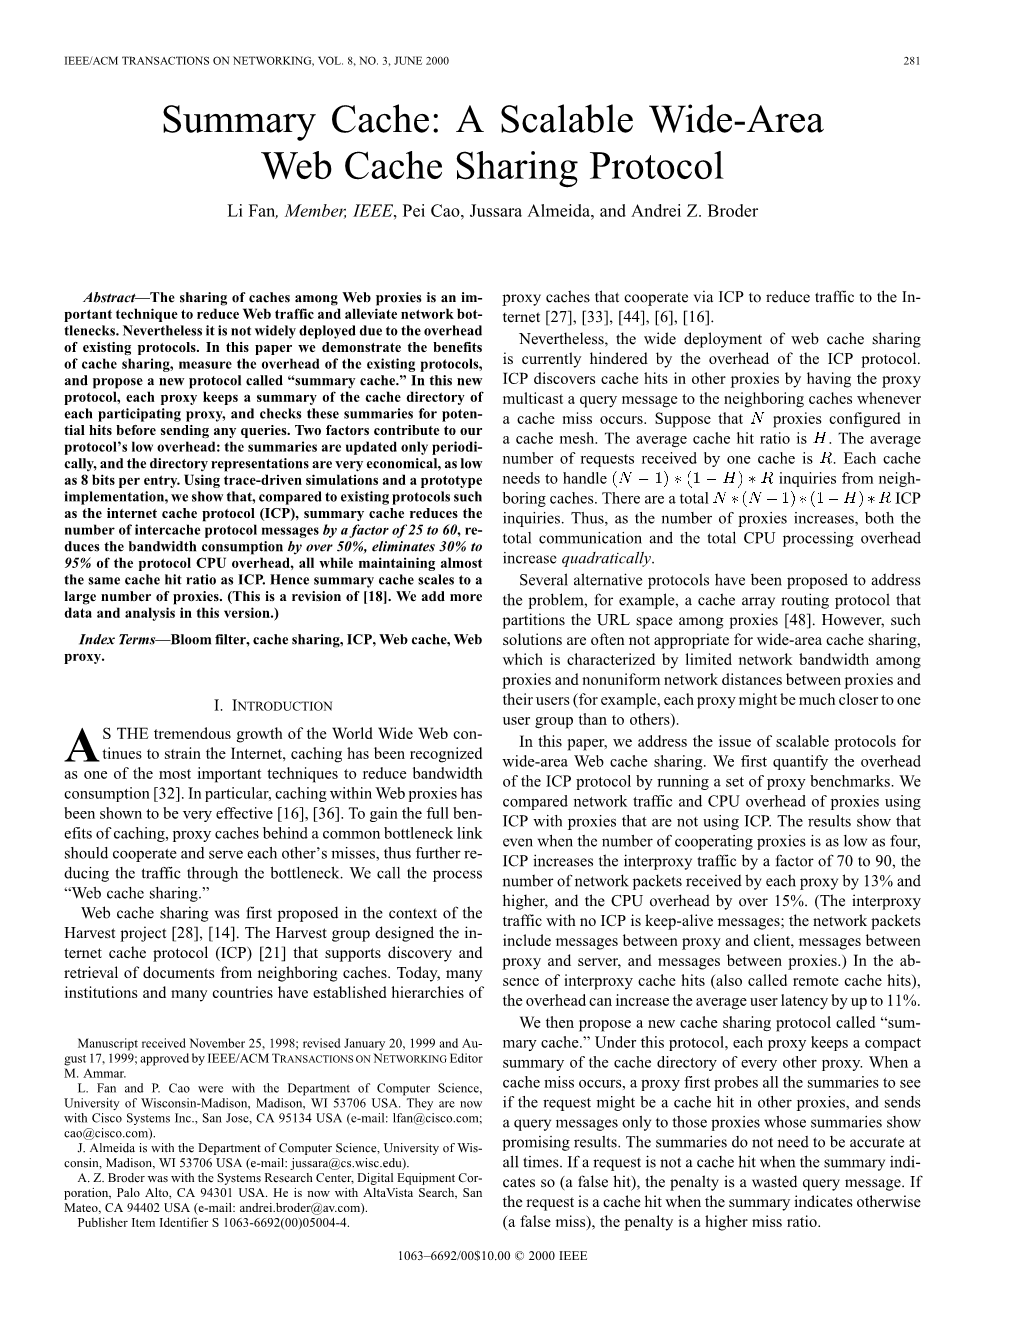 Summary Cache: a Scalable Wide-Area Web Cache Sharing Protocol Li Fan, Member, IEEE, Pei Cao, Jussara Almeida, and Andrei Z